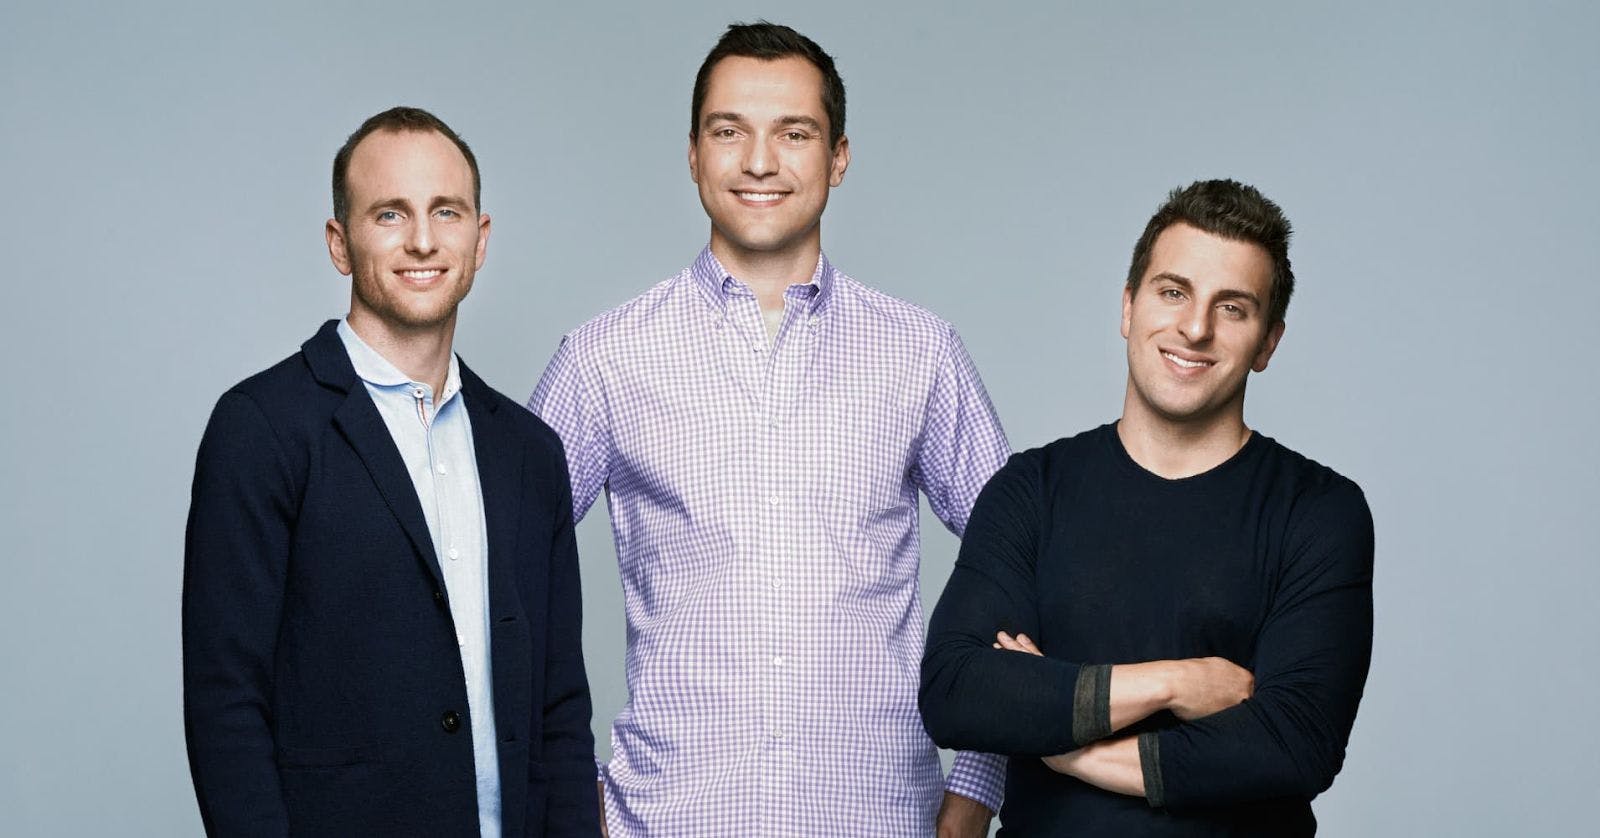 Airbnb Co-founders Brian Chesky (right), Nathan Blecharczyk (middle), and Joe Gebbia (left)